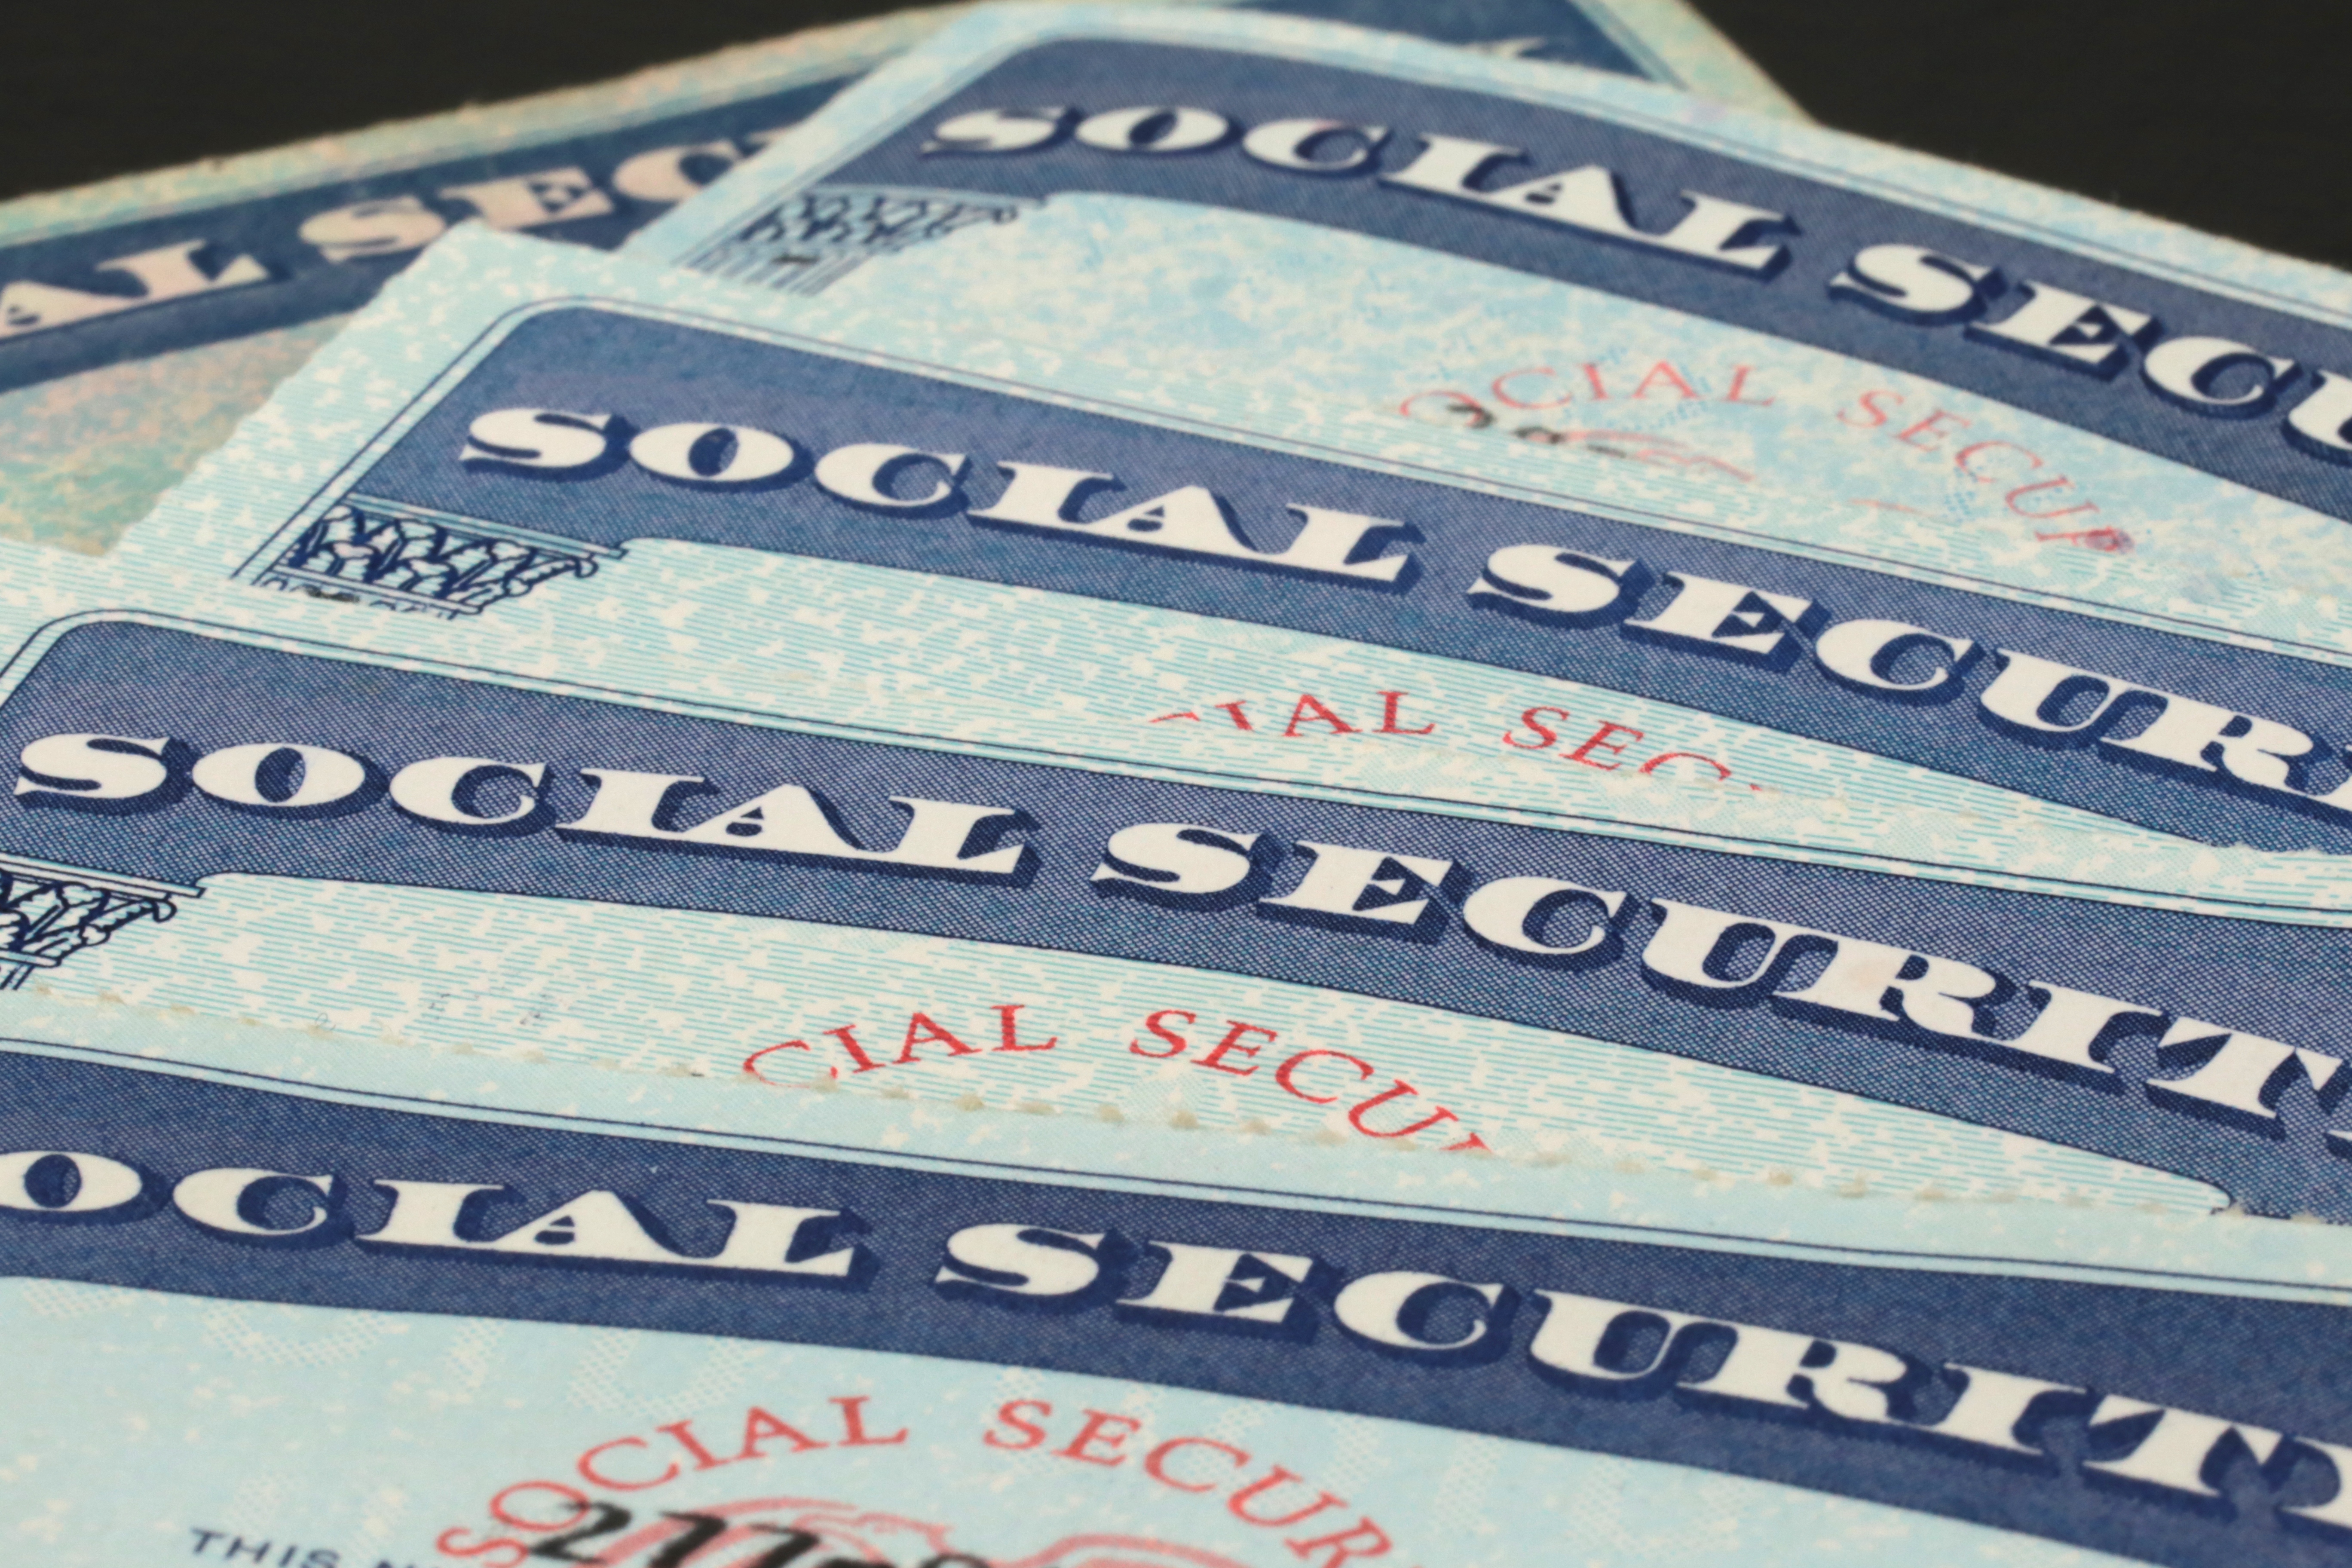 Amid uncertainty around Social Security, here’s what financial advisers are telling clients